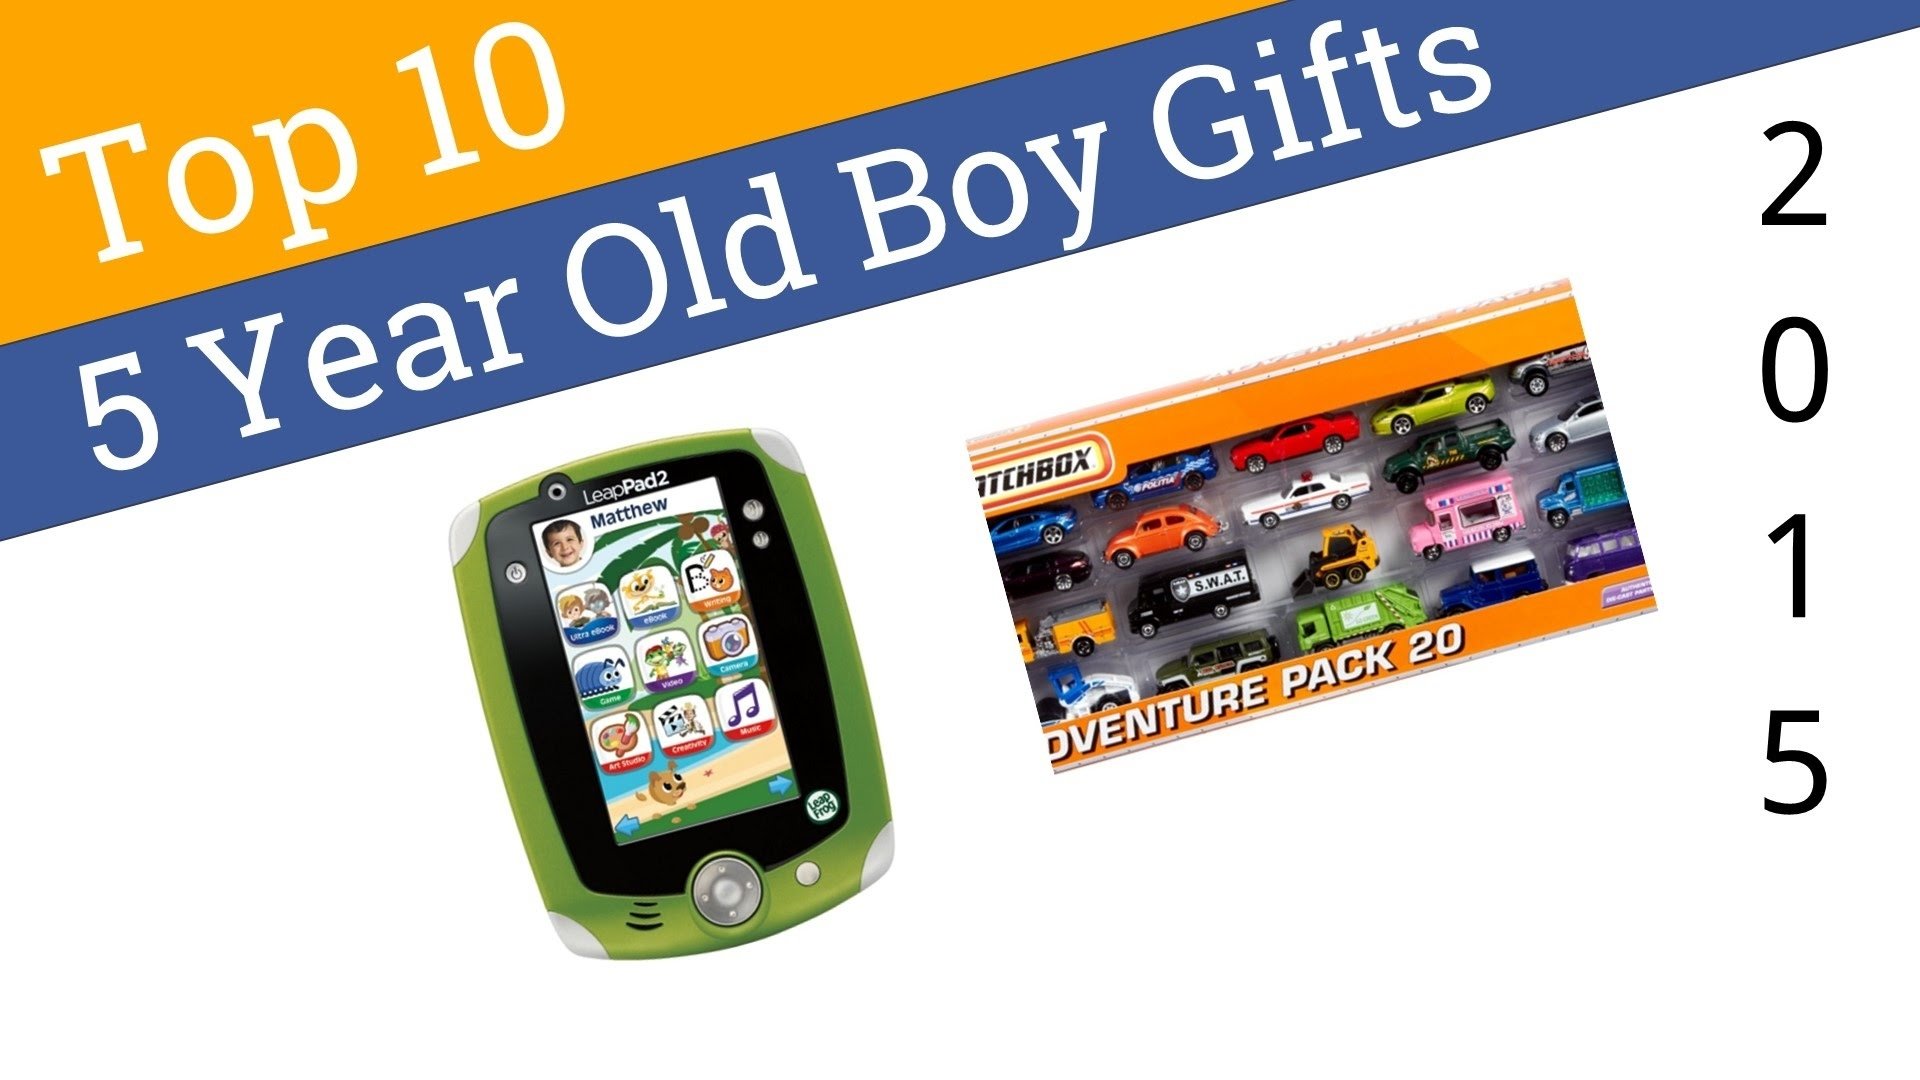 10 Awesome Birthday Ideas For A 5 Year Old Boy 10 best 5 year old boy gifts 2015 youtube 2 2023